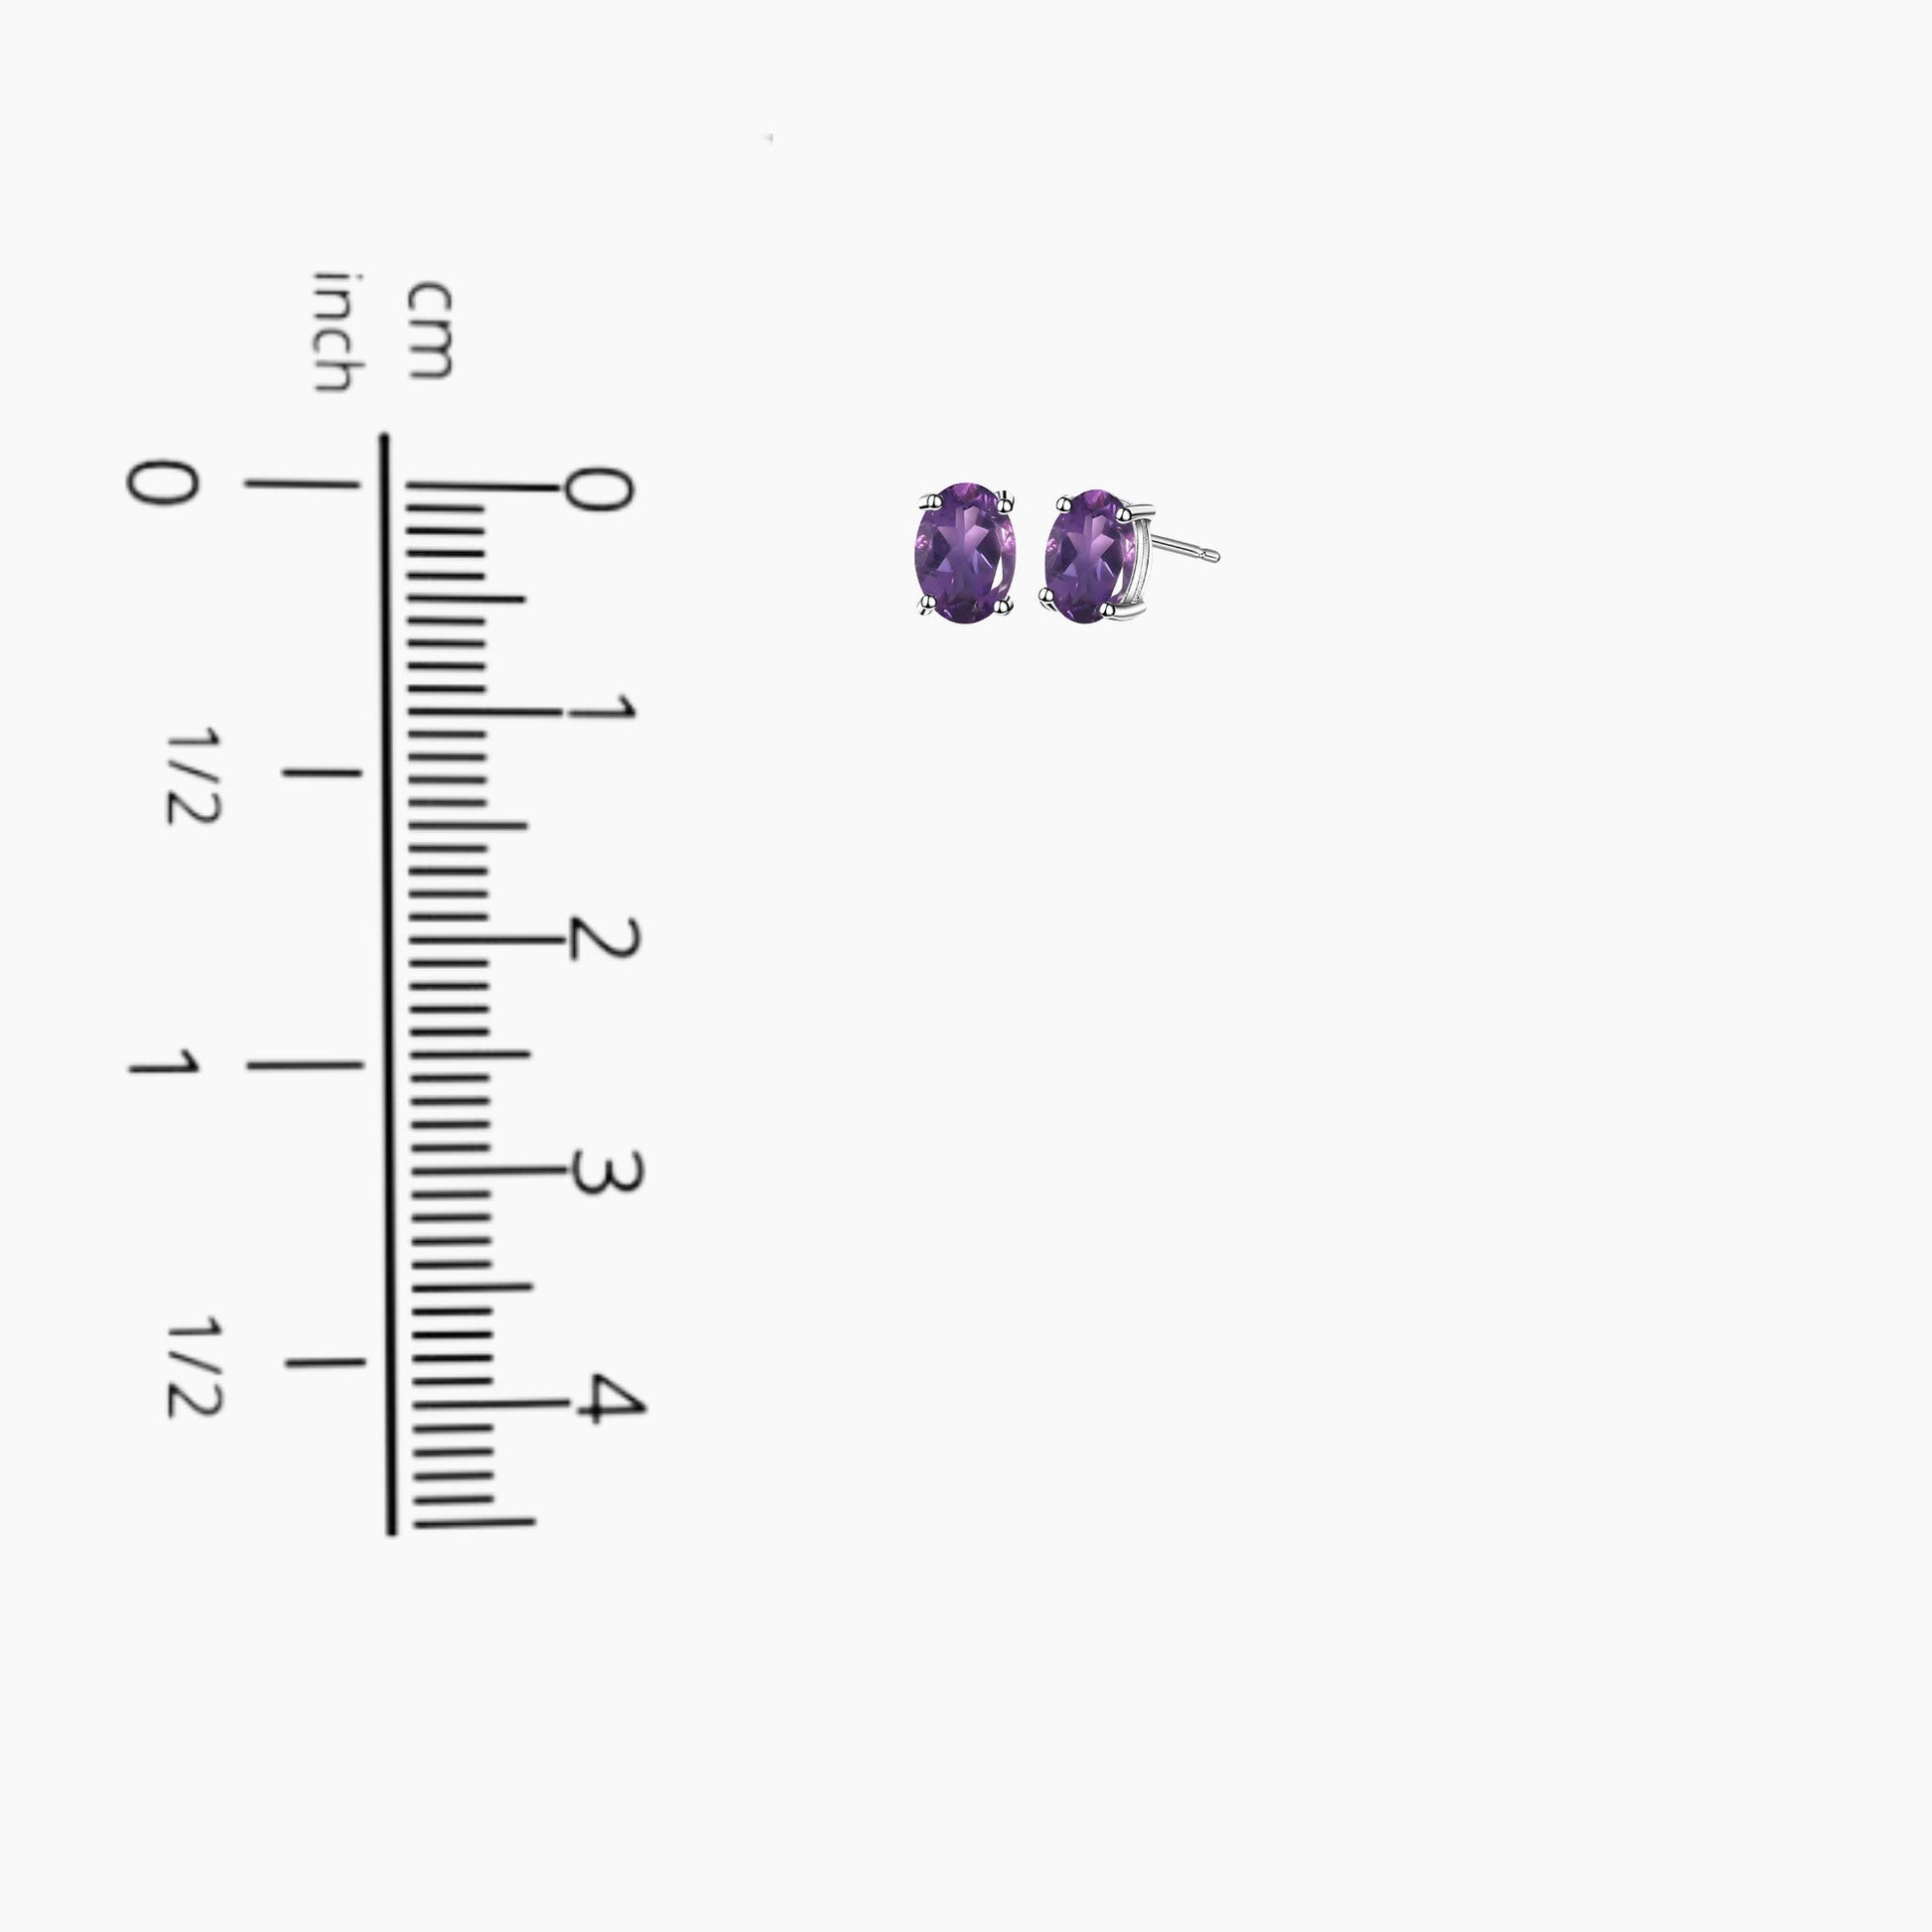 Amethyst Oval Stud Earrings displayed on a scale, providing an accurate representation of their size and dimensions.